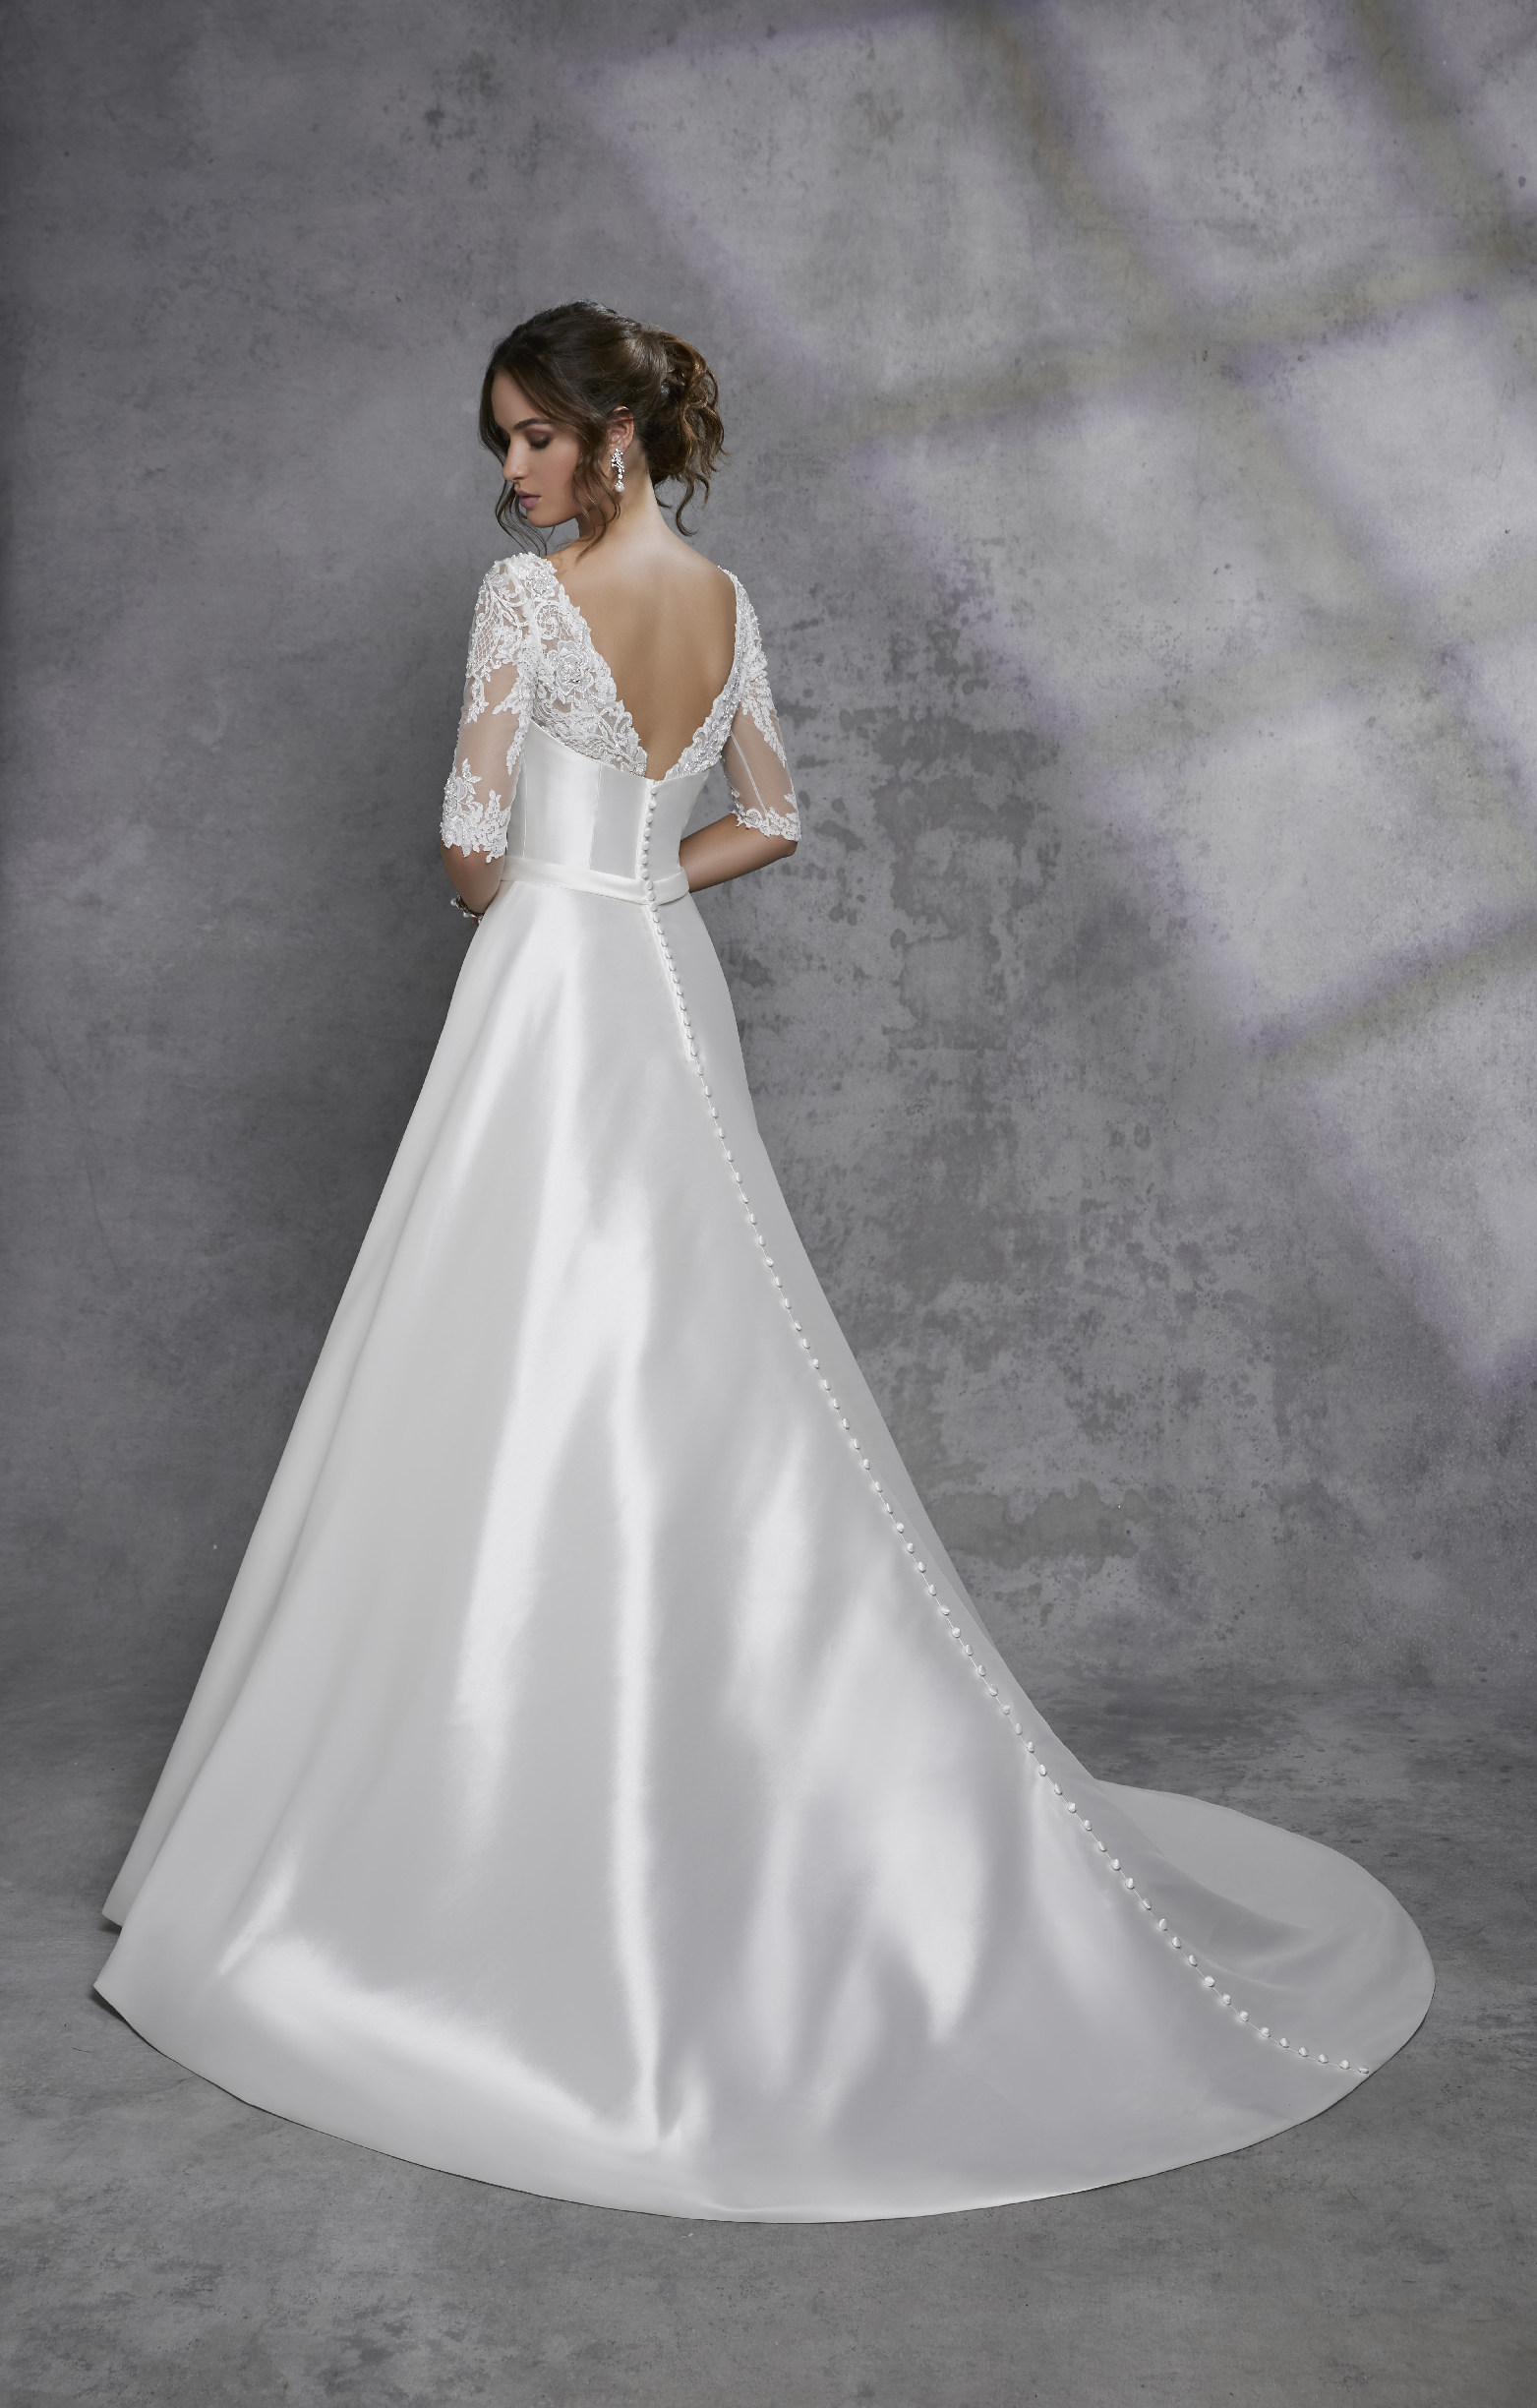 Back image of a woman standing in a photography studio with grey backdrop wearing mikado ballgown wedding dress with low back and lace sleeves